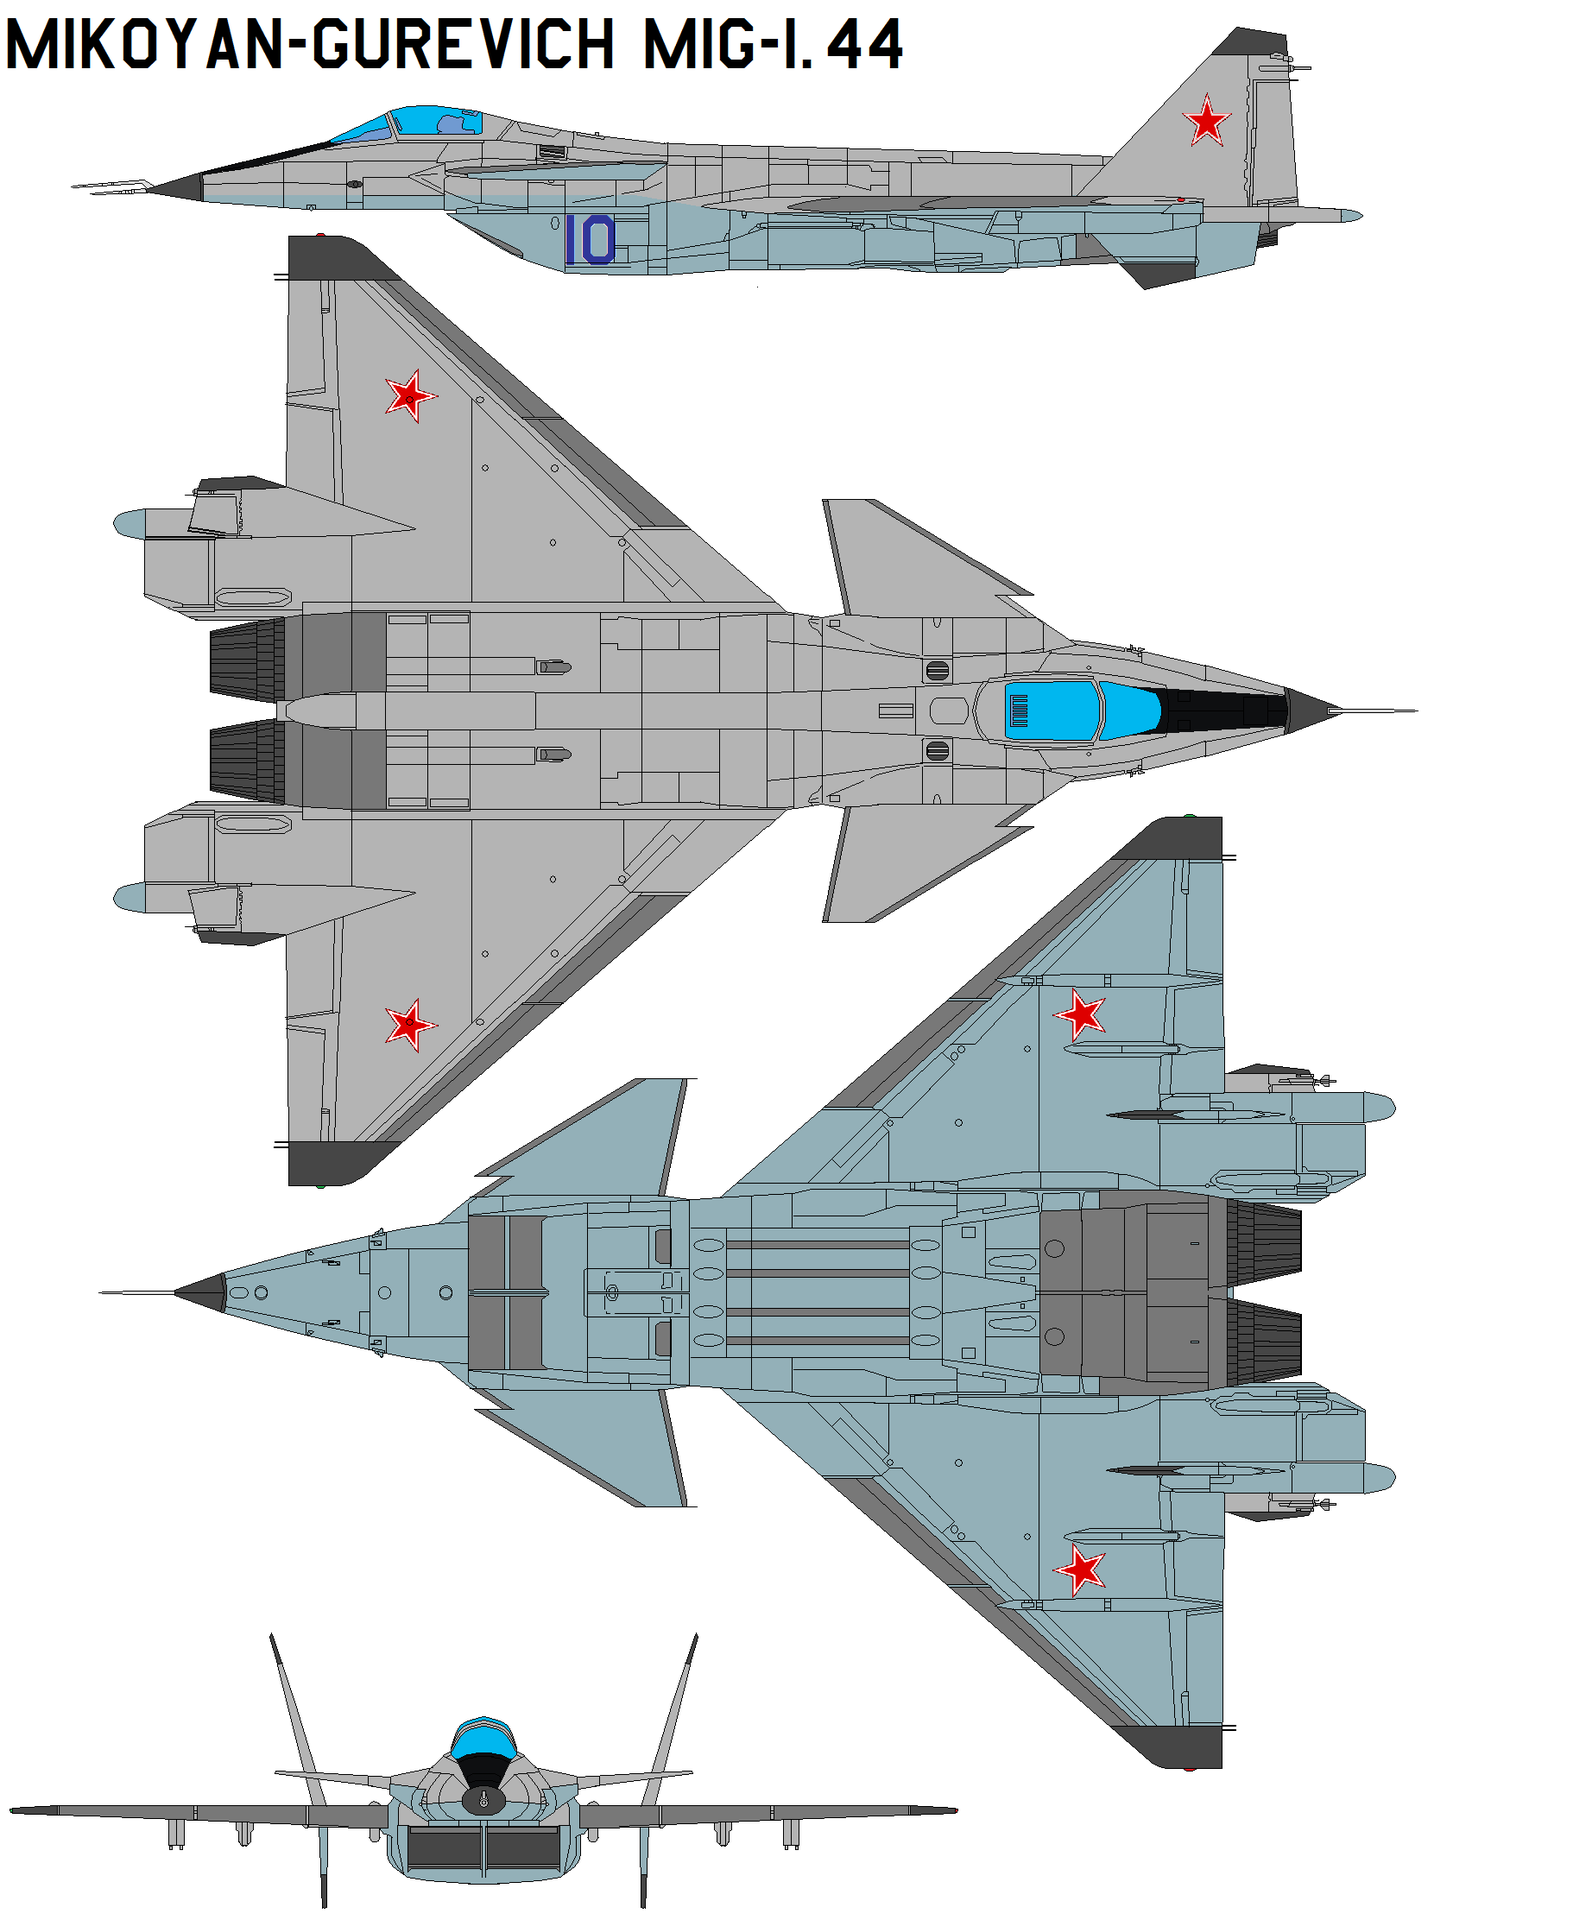 1592px-MiG-1.44-crossection.png